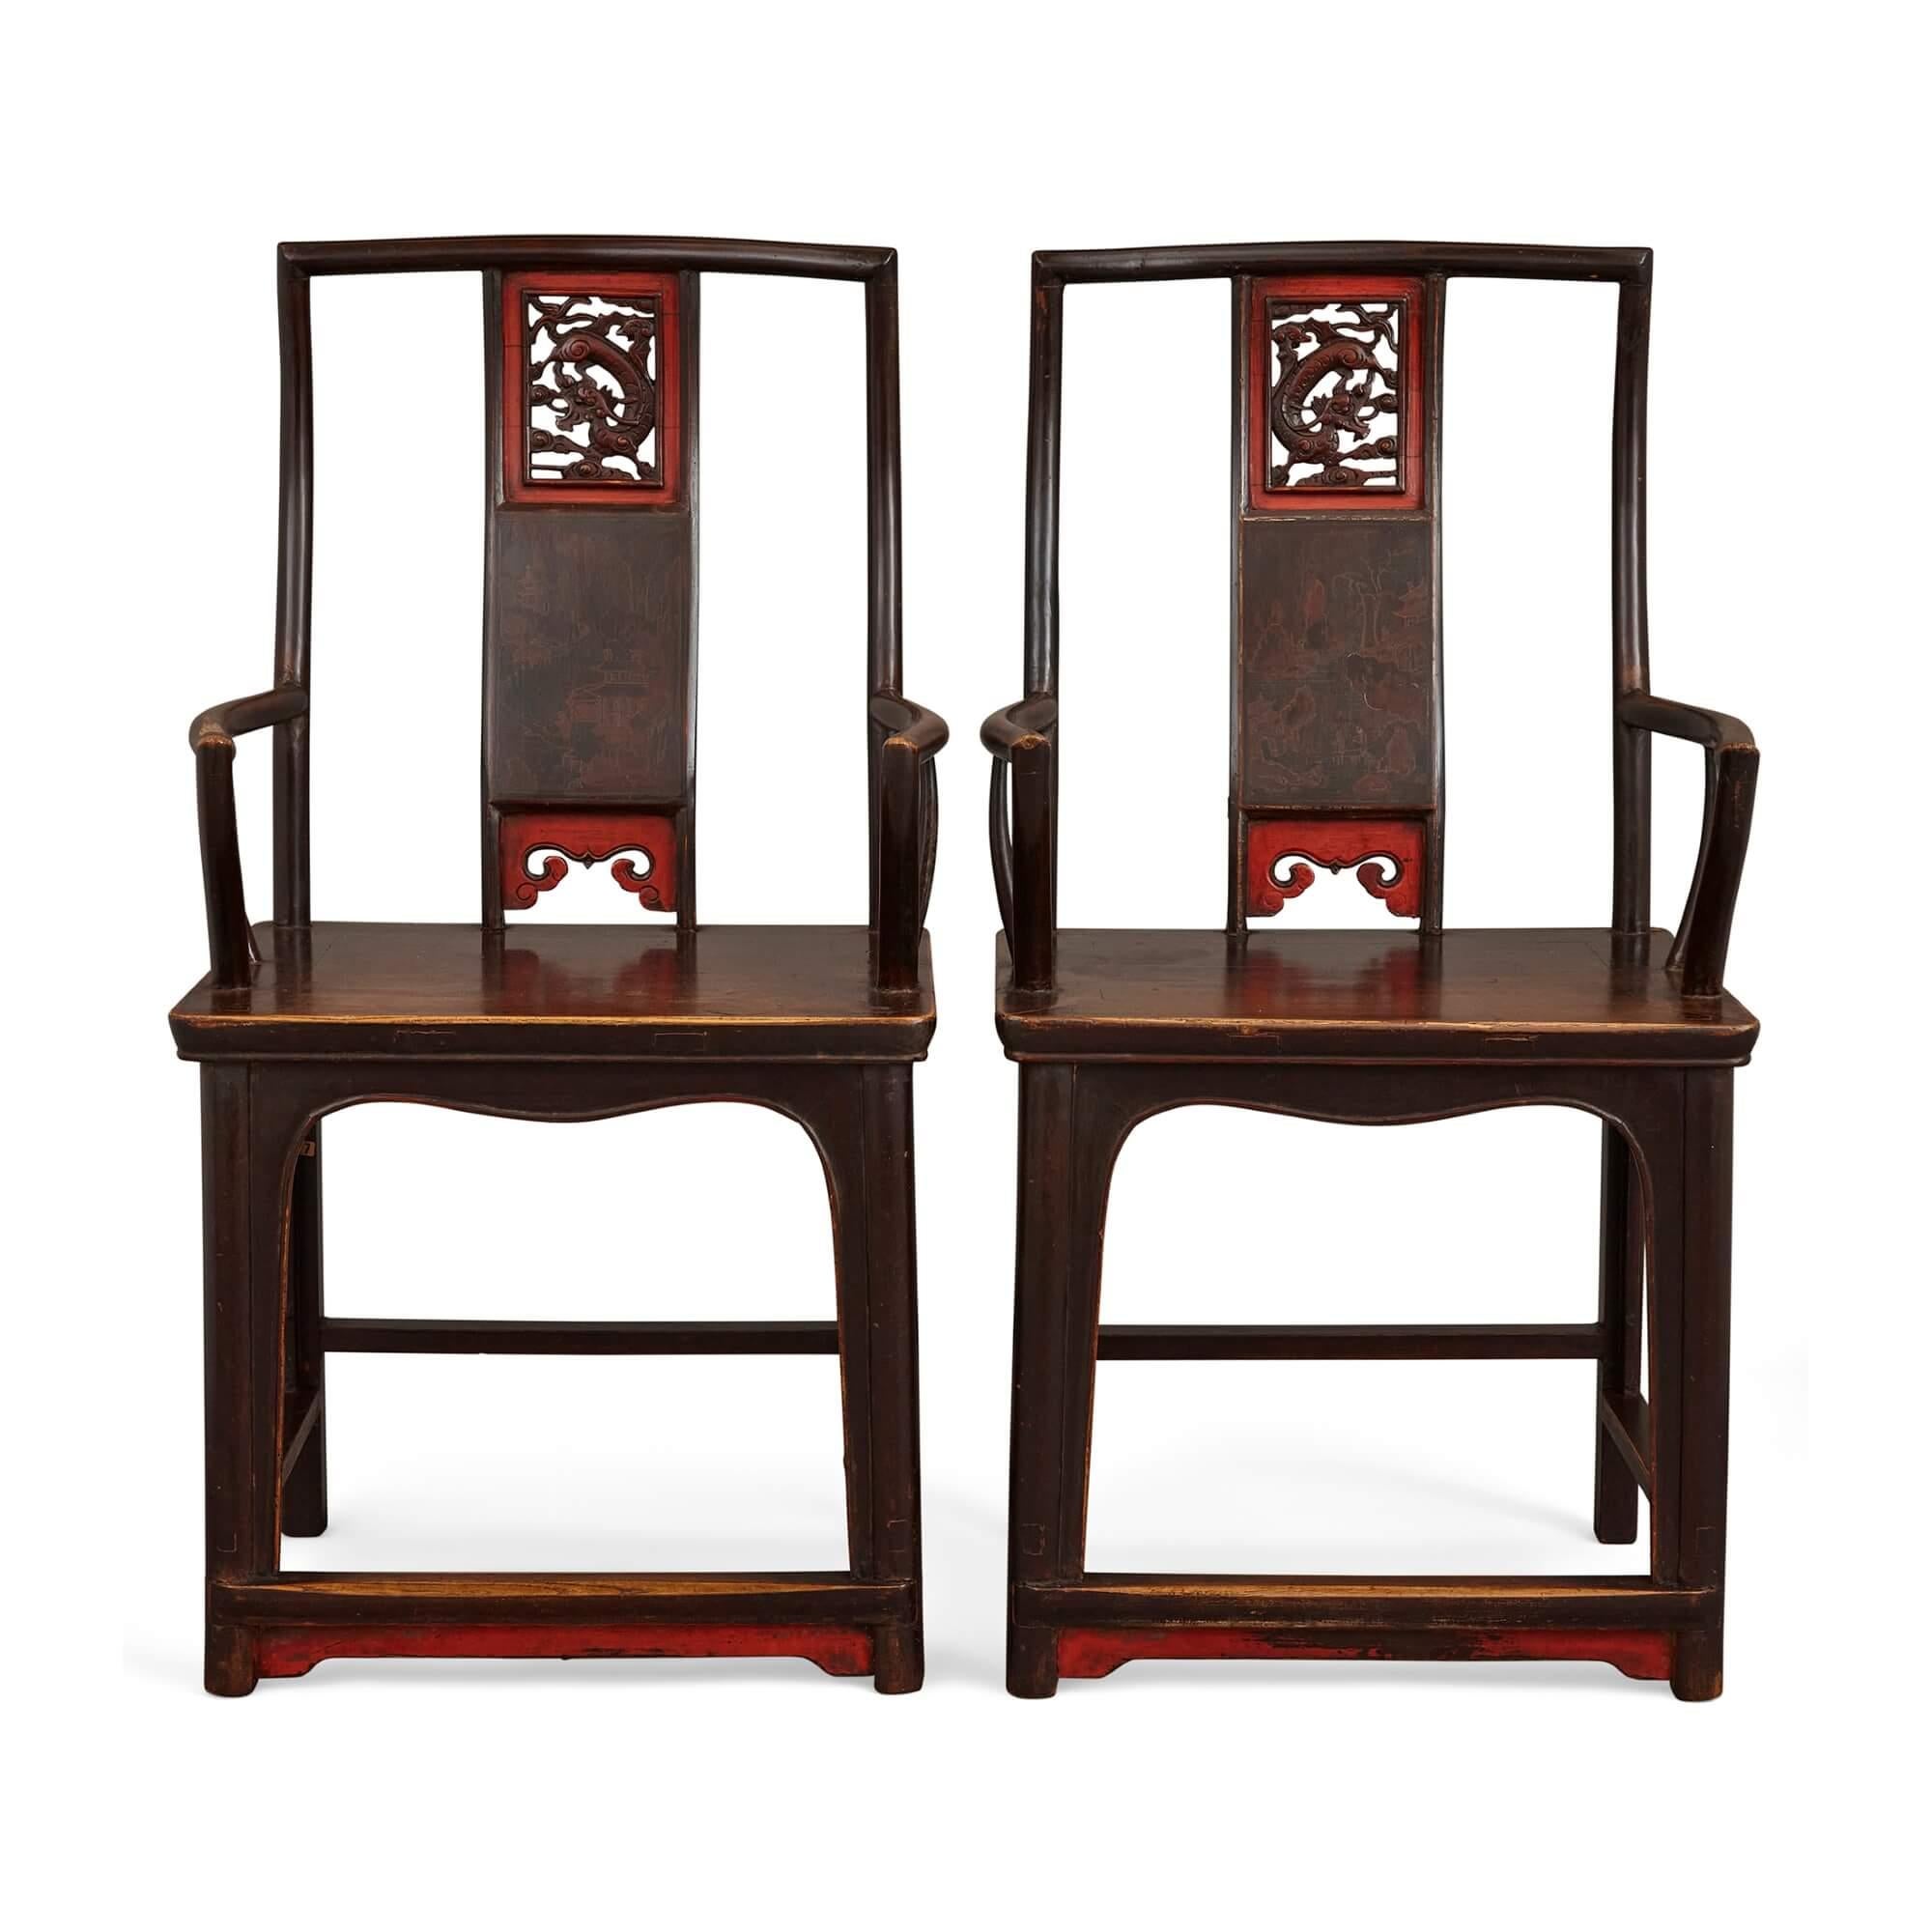 Pair of lacquered and painted Chinese yoke back armchairs.
Chinese, 19th century.
Measures: Height 108cm, width 56cm, depth 43cm.

Featuring a top rail supported by an s-shaped splat, which is comprised of three panels, this fine pair of works